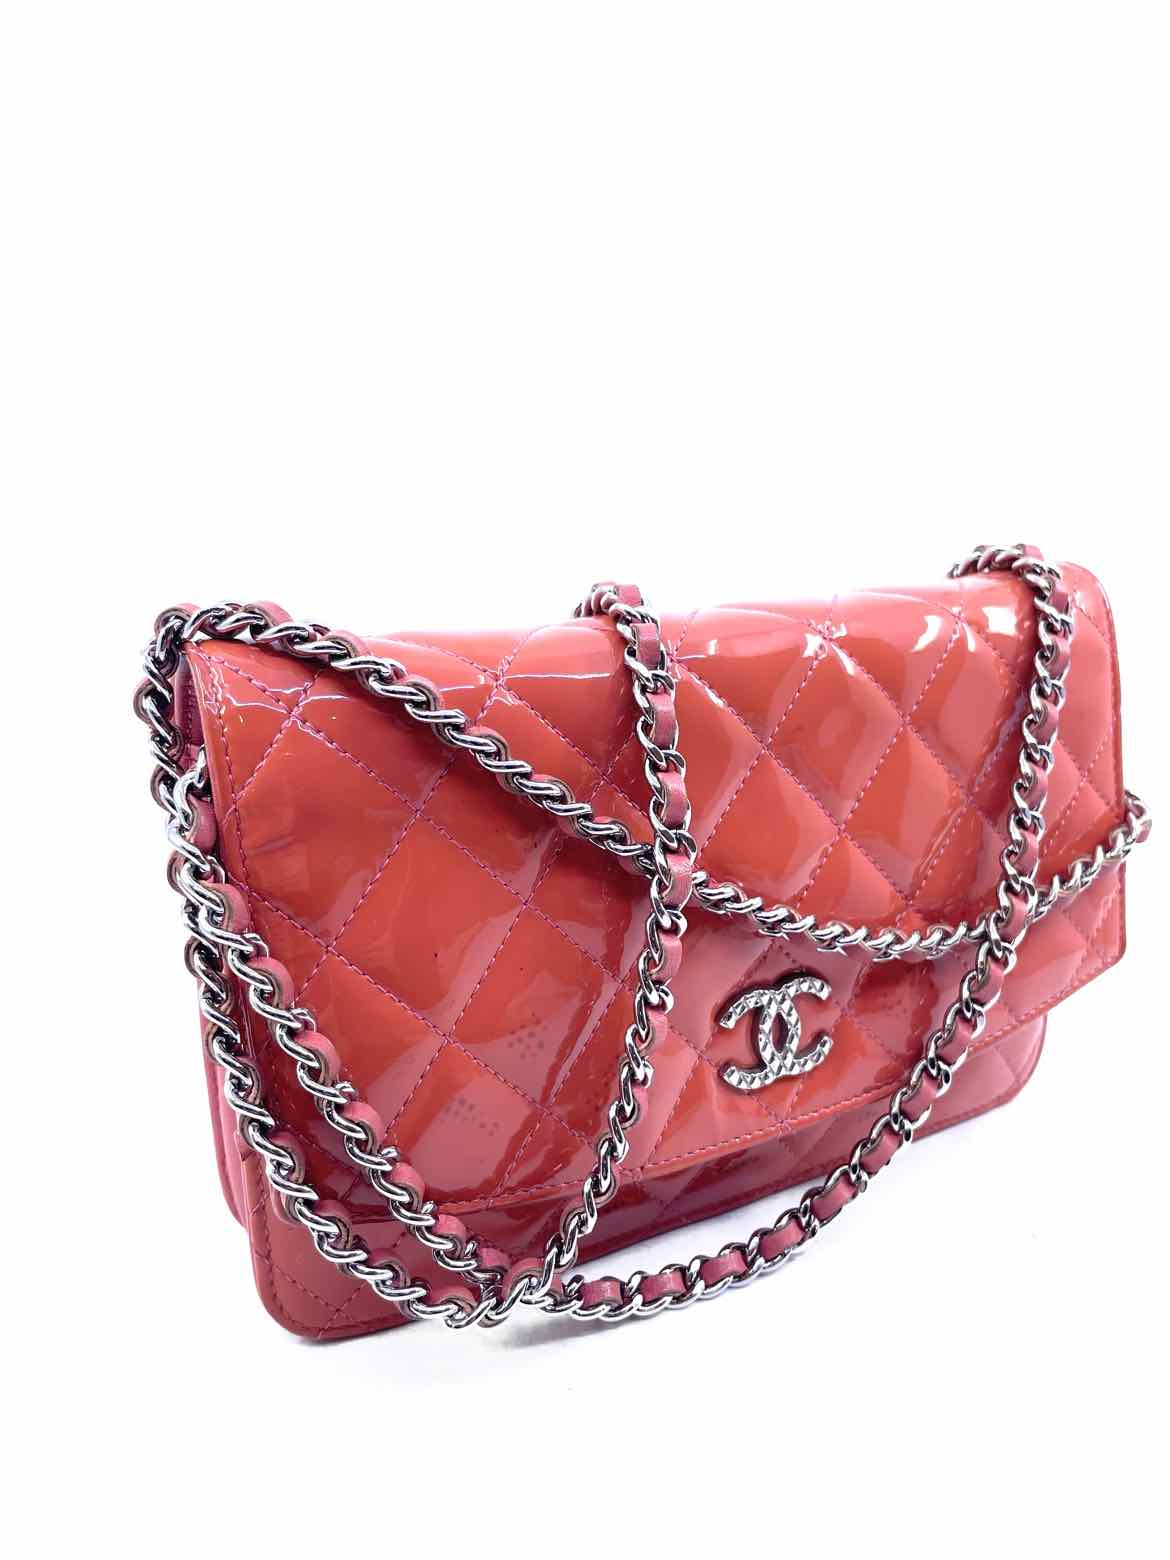 Chanel Patent Leather Tote